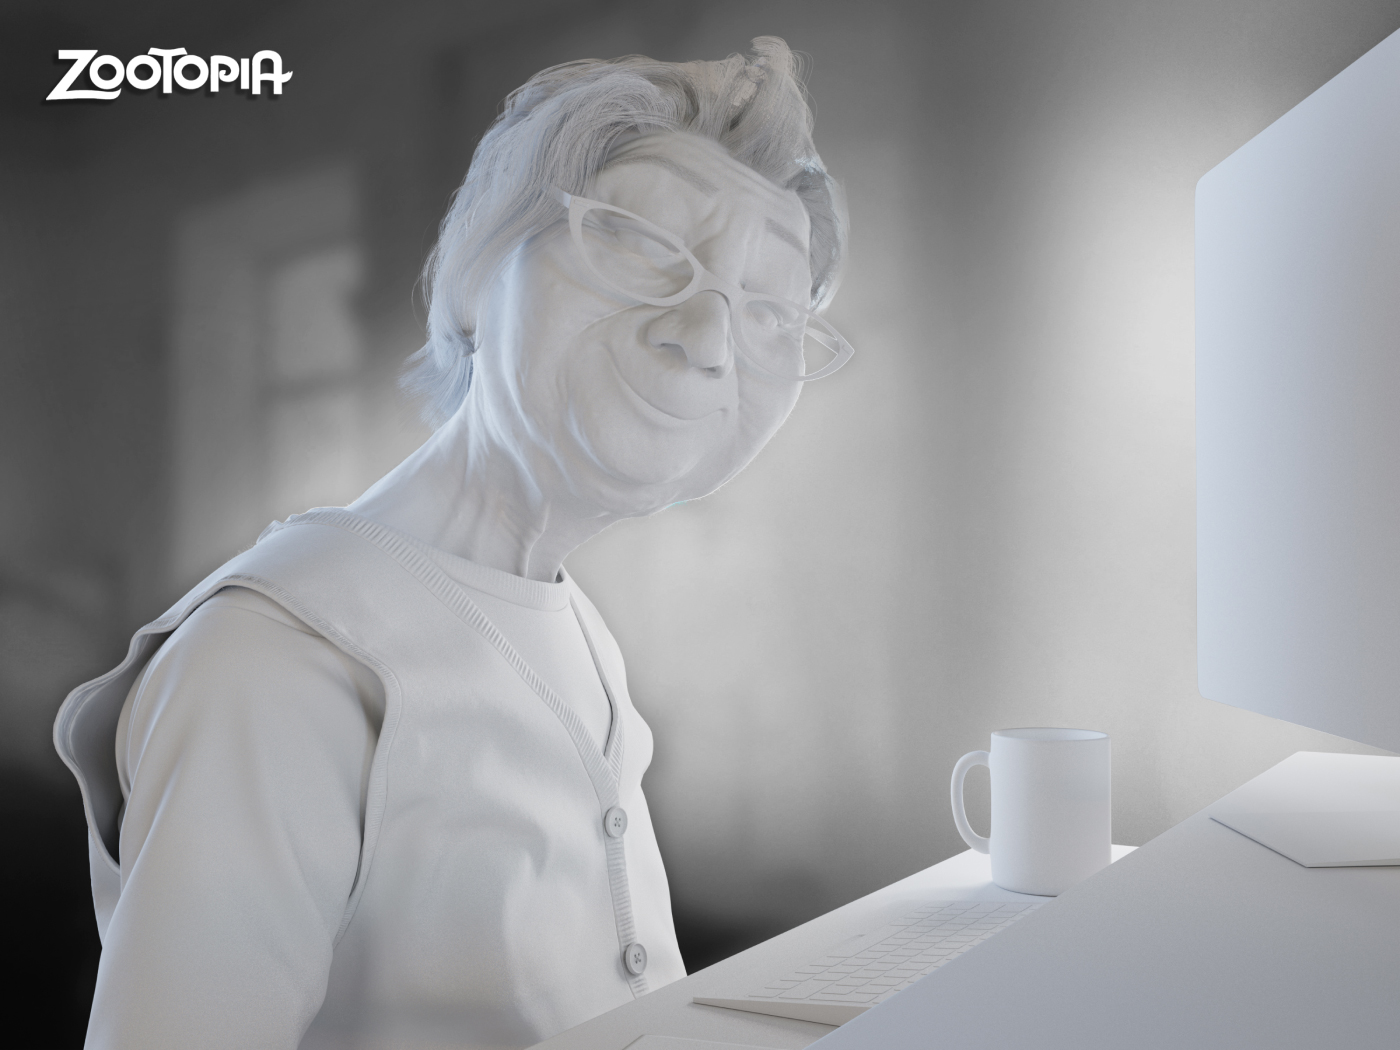 3D Model of a Granny Inspired by Zootopia's Sloth